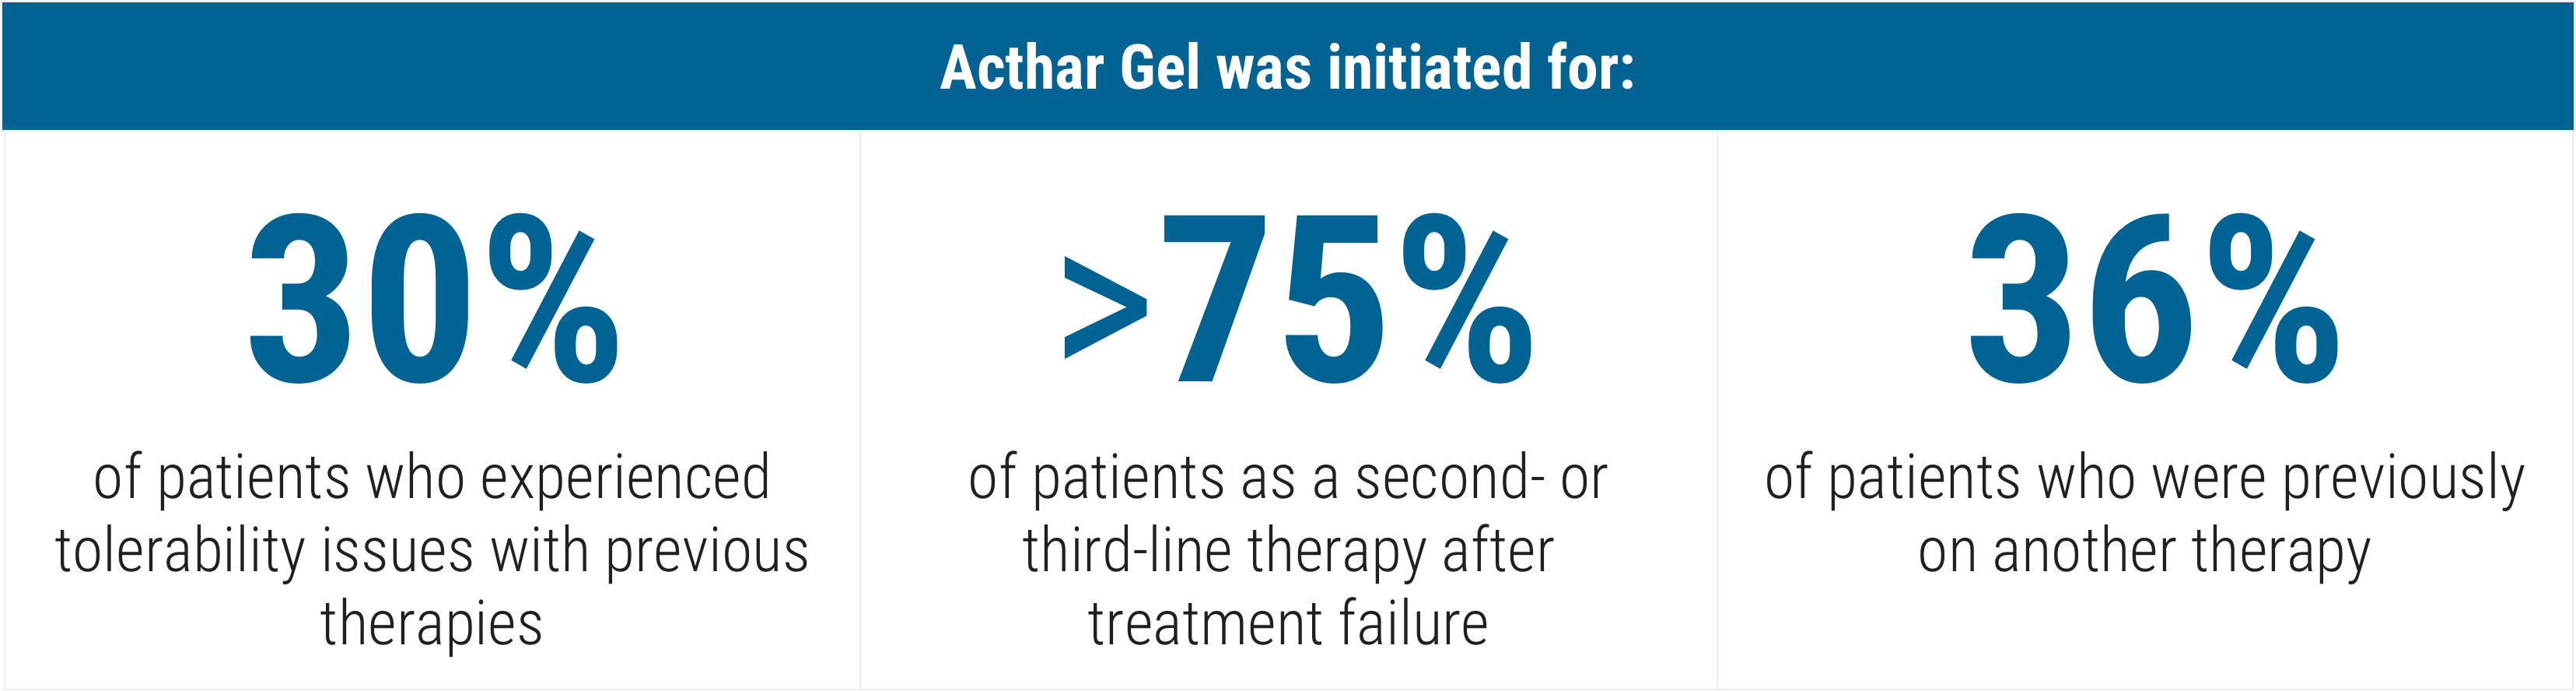 Percentage of patients initiated on Acthar Gel by expert panelists